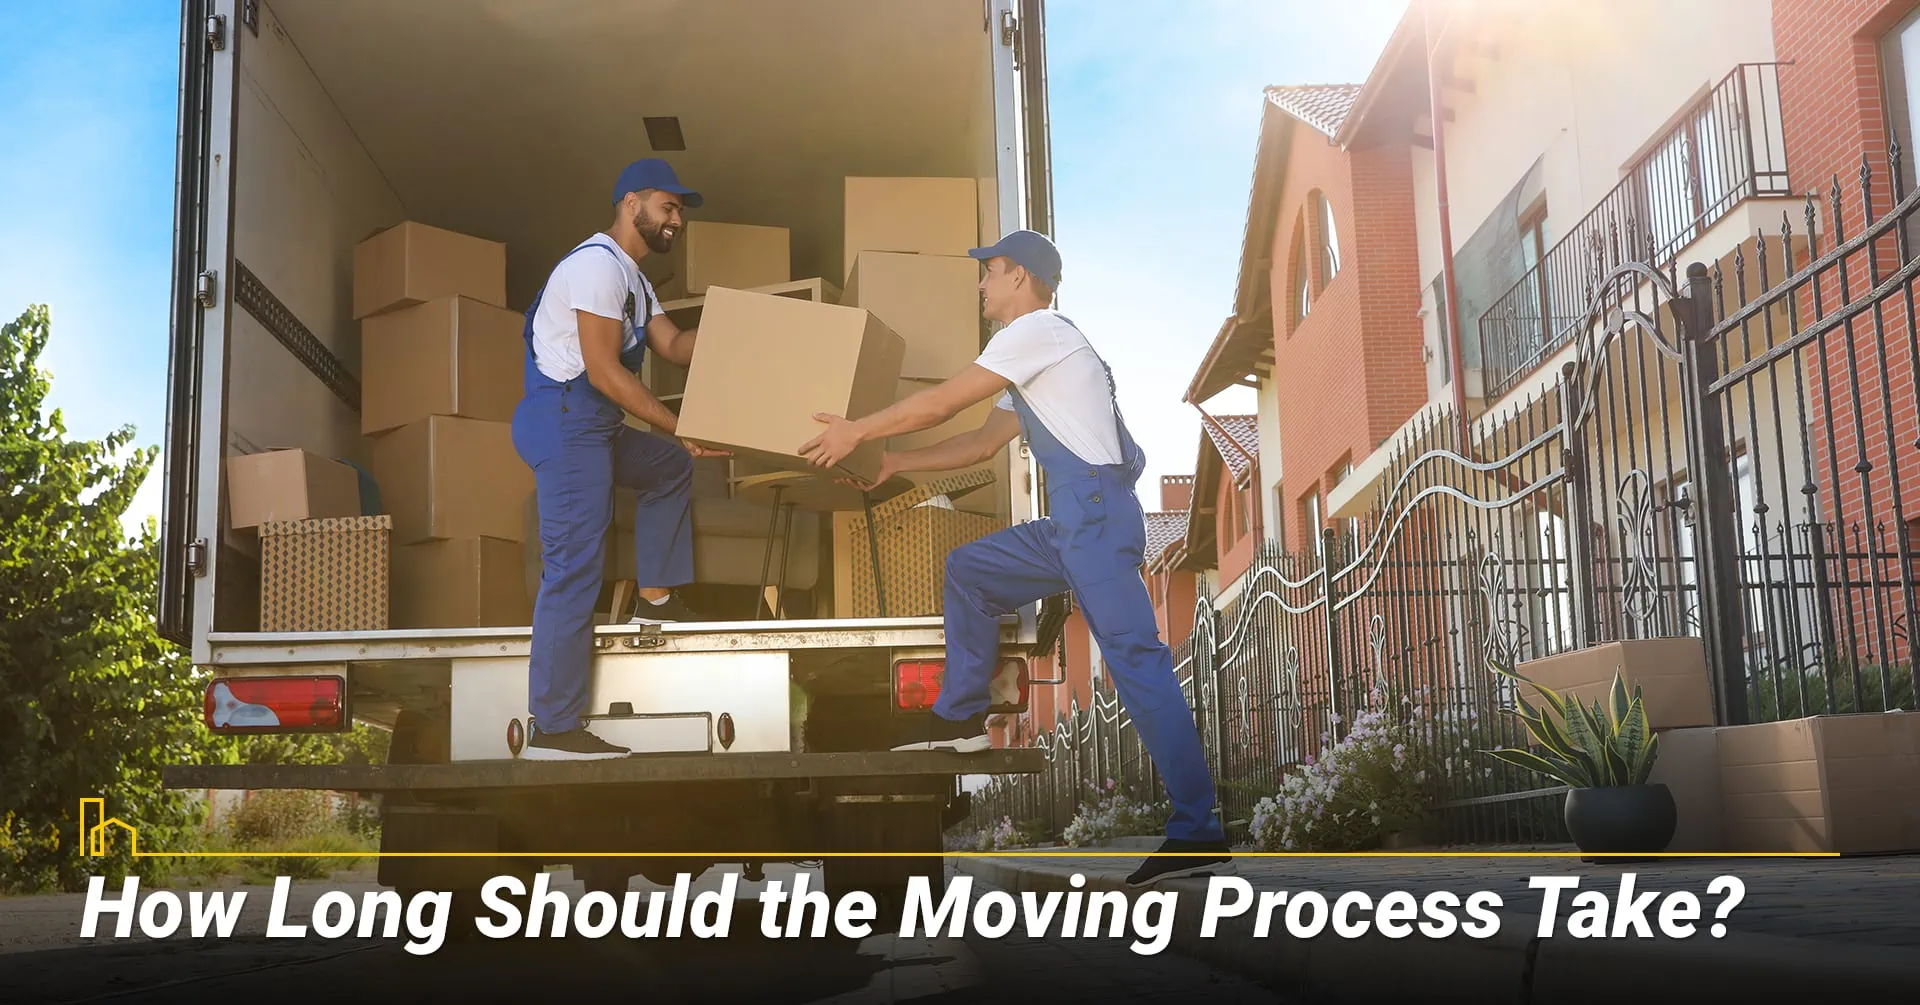 How Long Should the Moving Process Take?